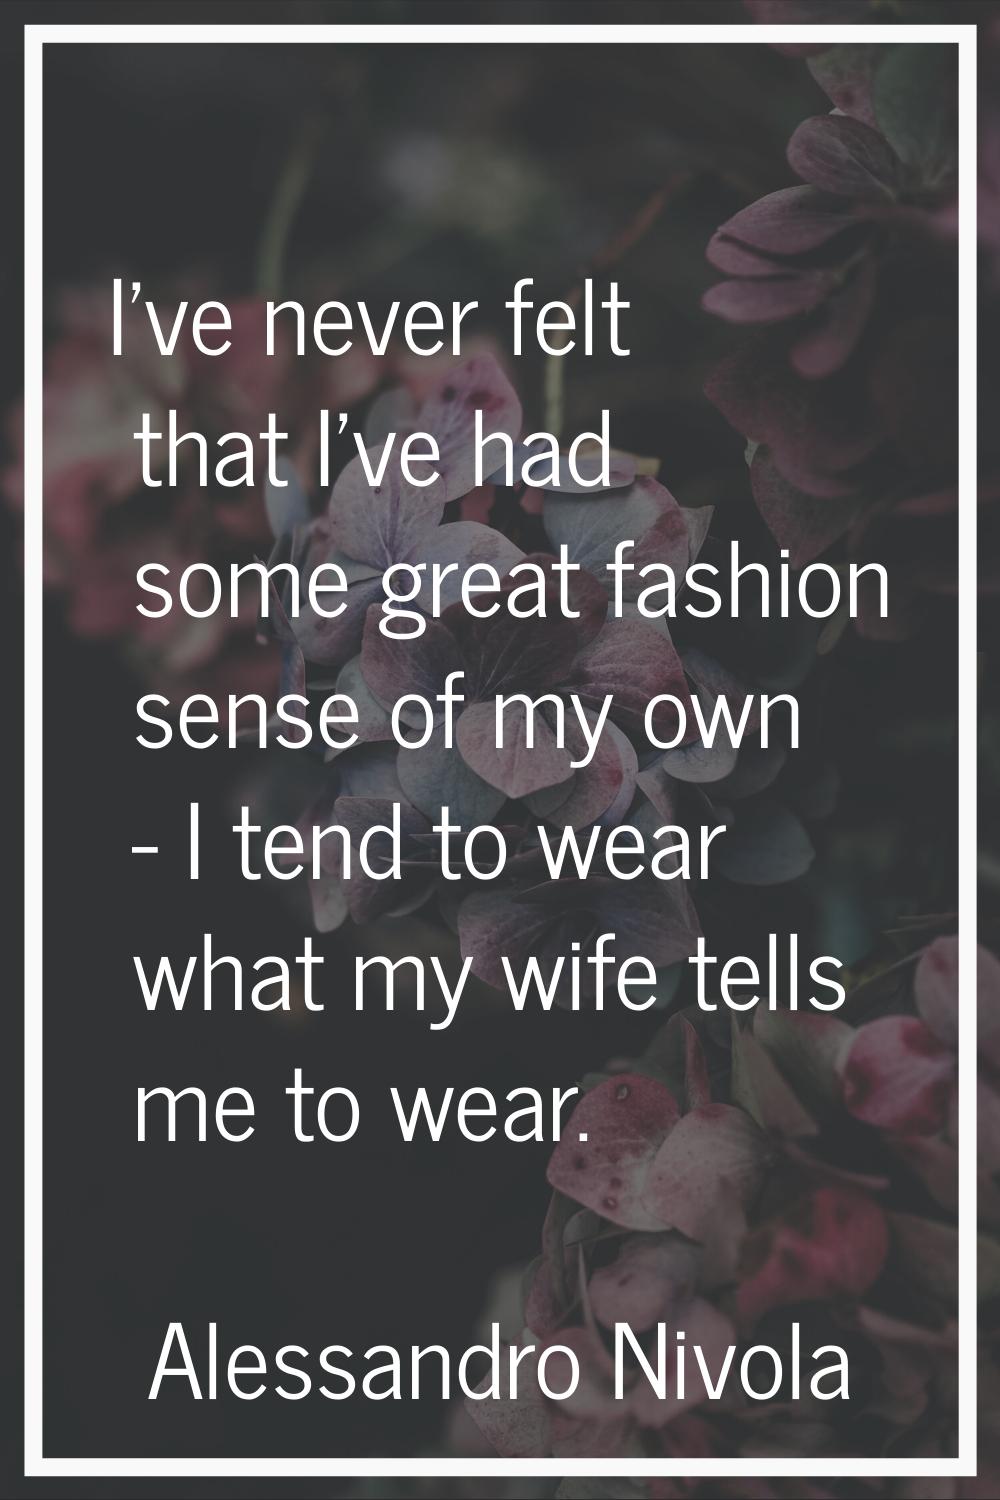 I've never felt that I've had some great fashion sense of my own - I tend to wear what my wife tell